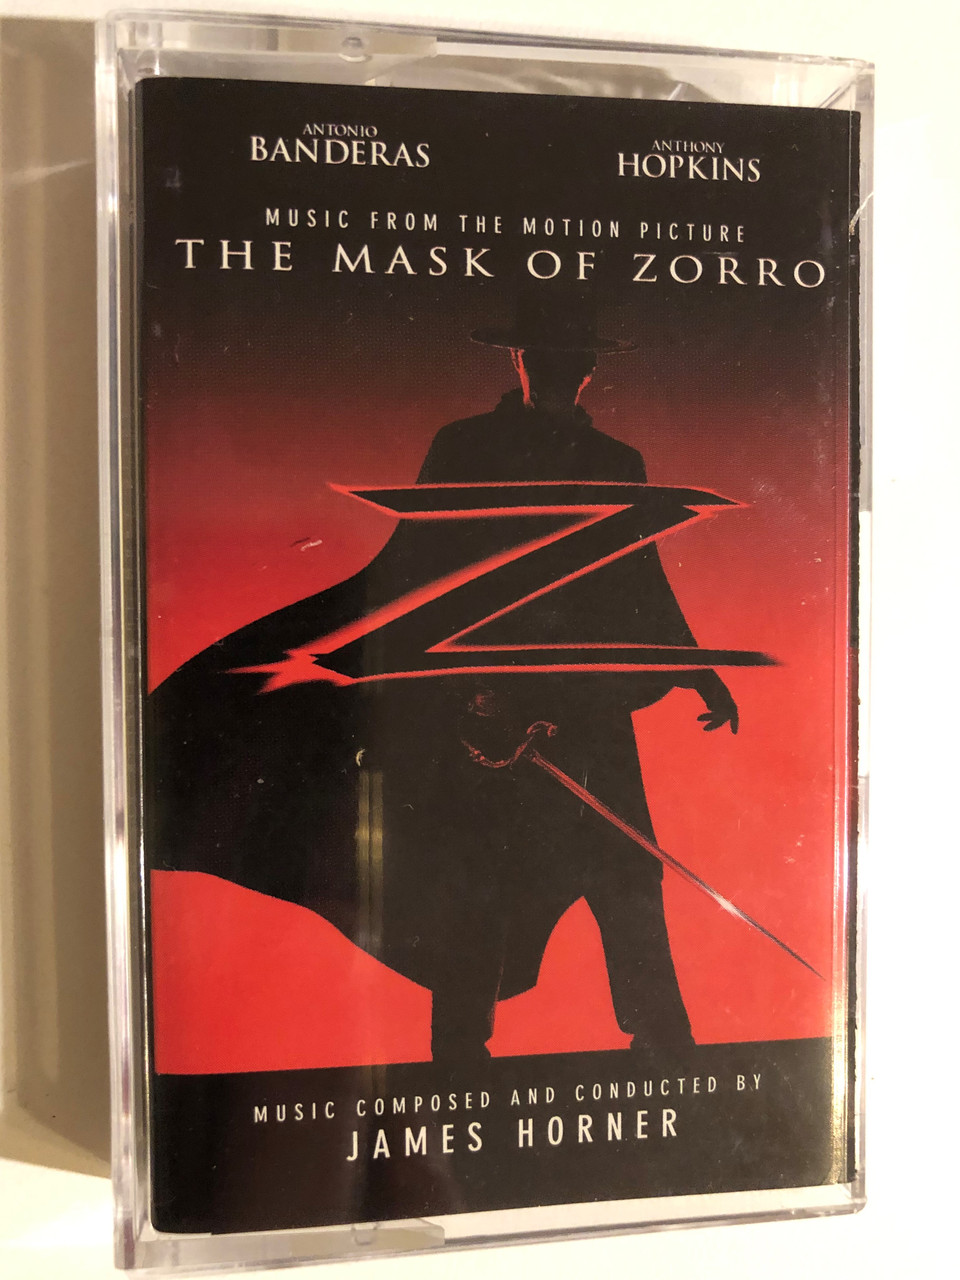 The Mask Of Zorro (Music From The Motion Picture) - Music Composed And  Conducted By James Horner / Antonio Banderas, Anthony Hopkins / Sony  Classical Audio Cassette 1998 / ST 60627 - bibleinmylanguage